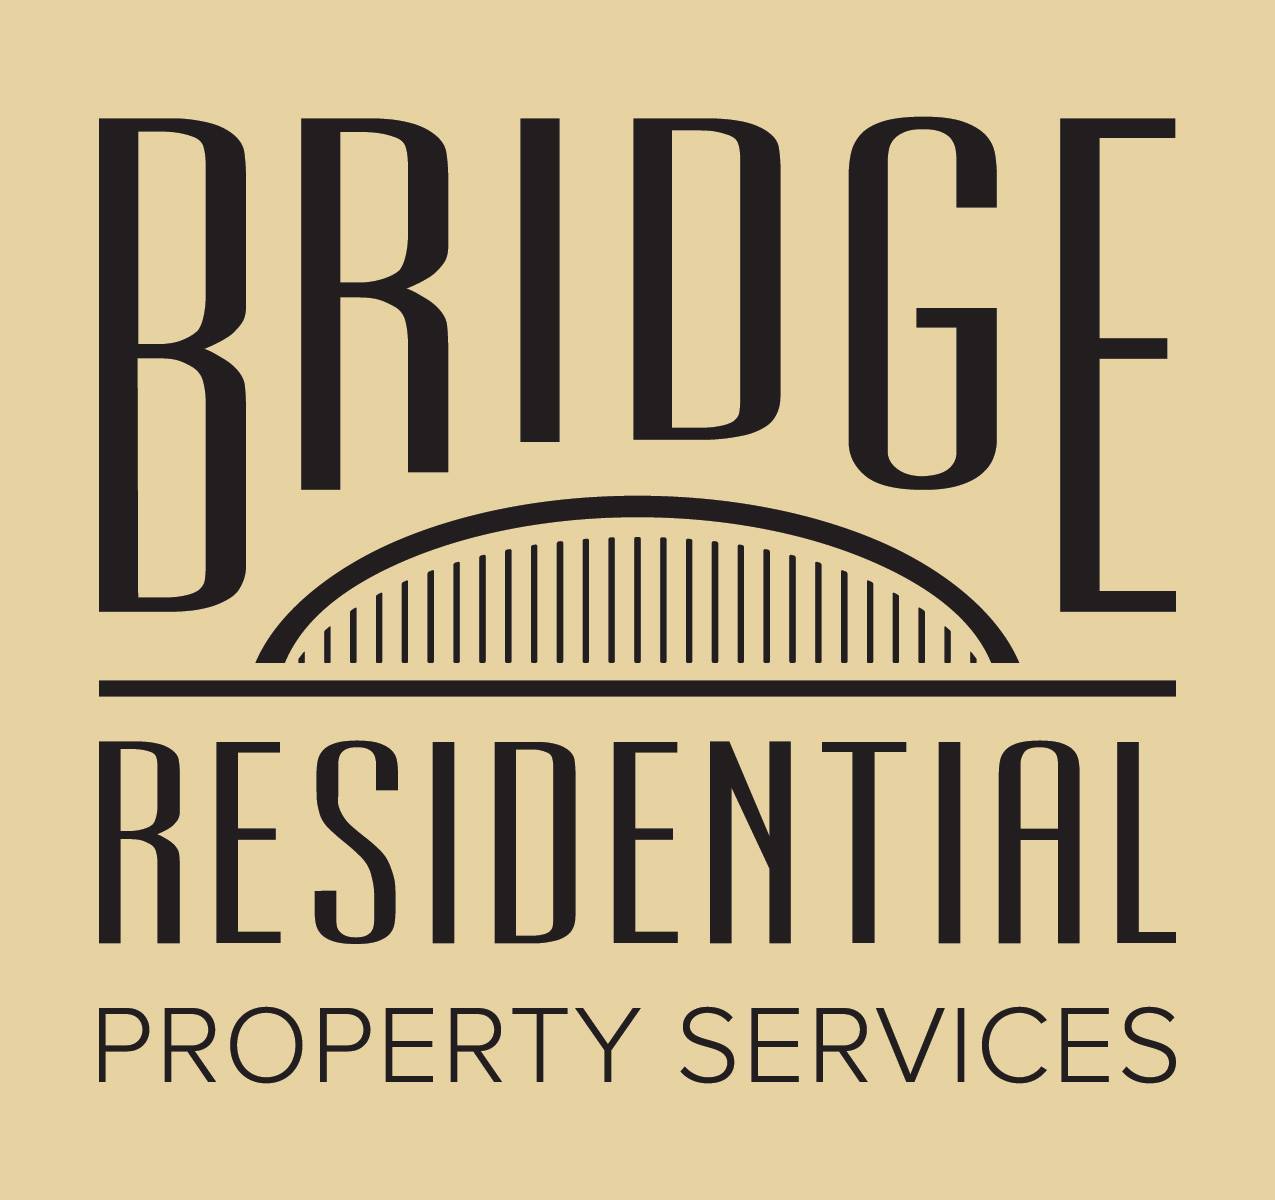 Company logo of Bridge Residential Property Services